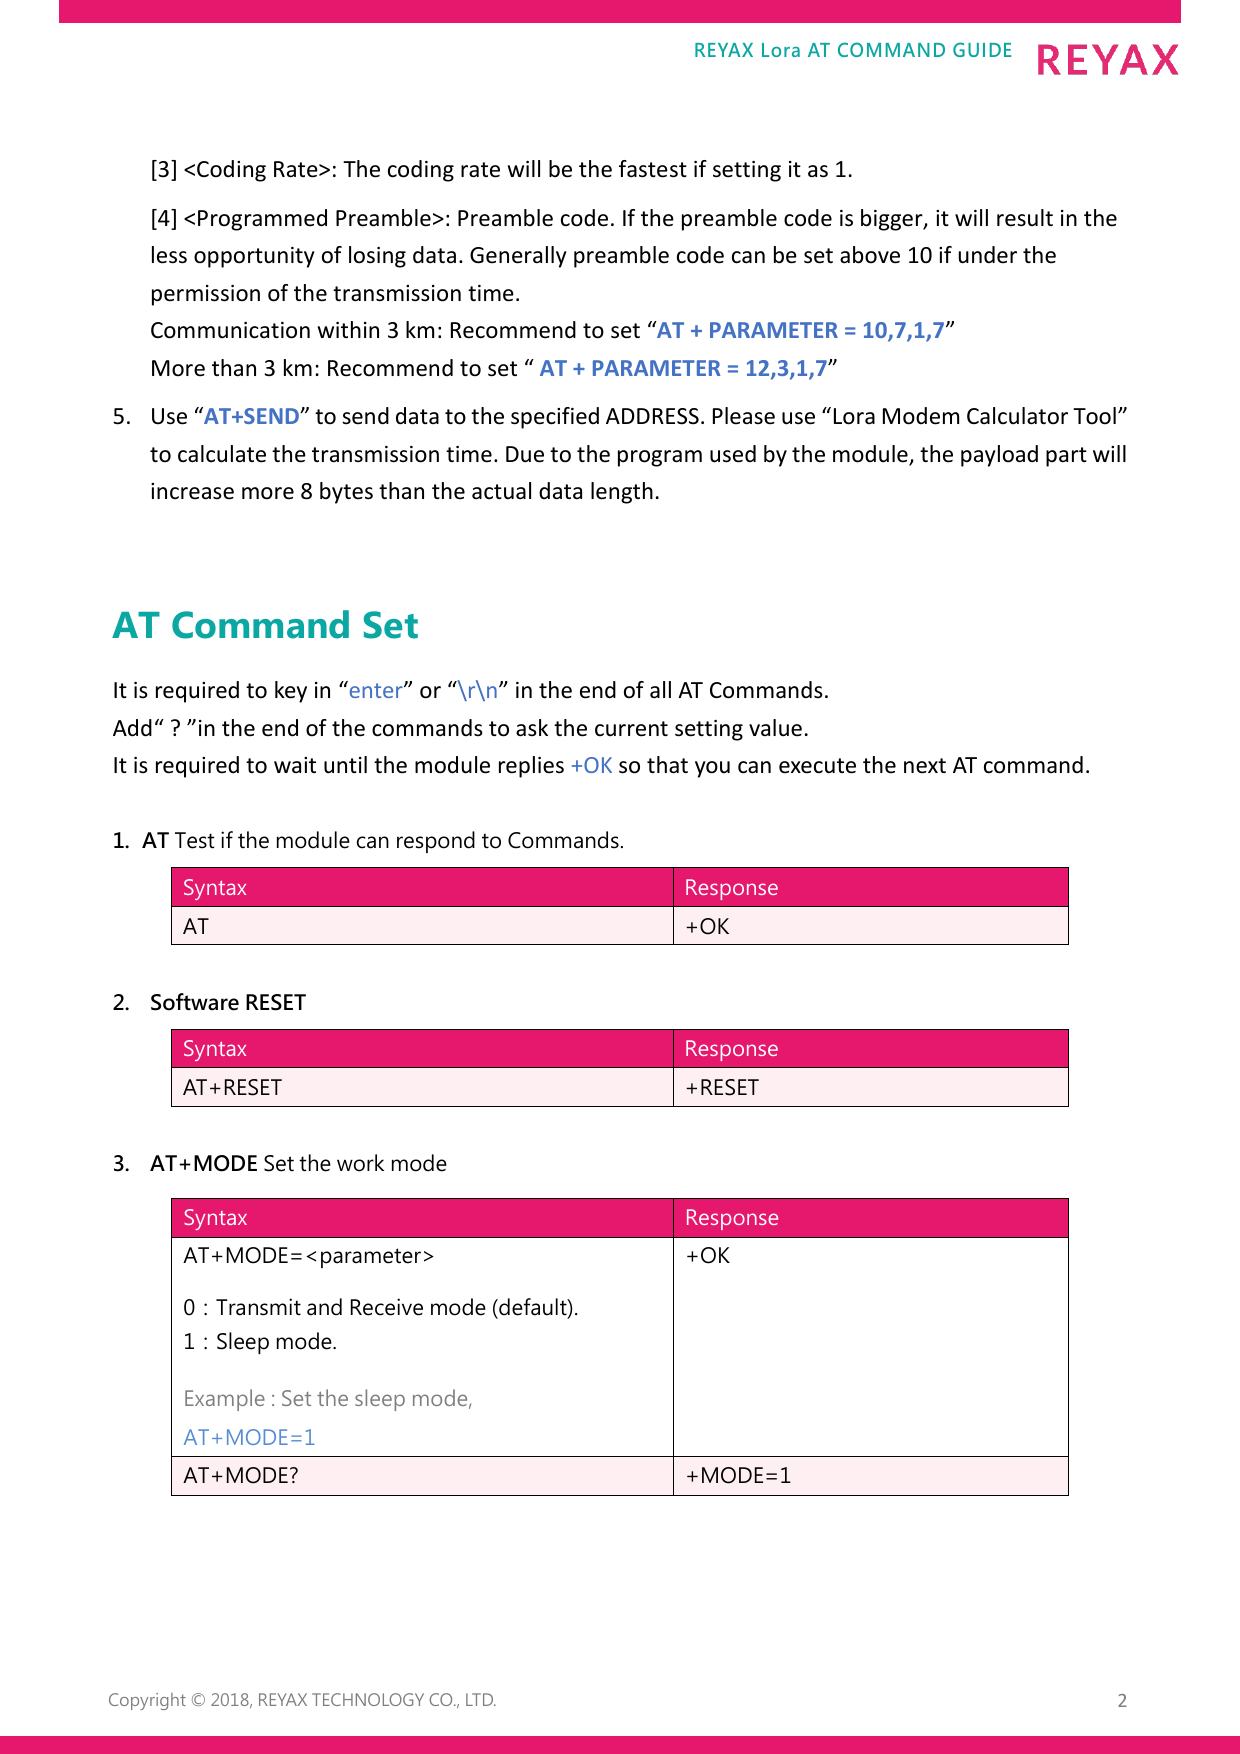 Page 2 of 9 - REYAX-Lora AT COMMAND GUIDE EN